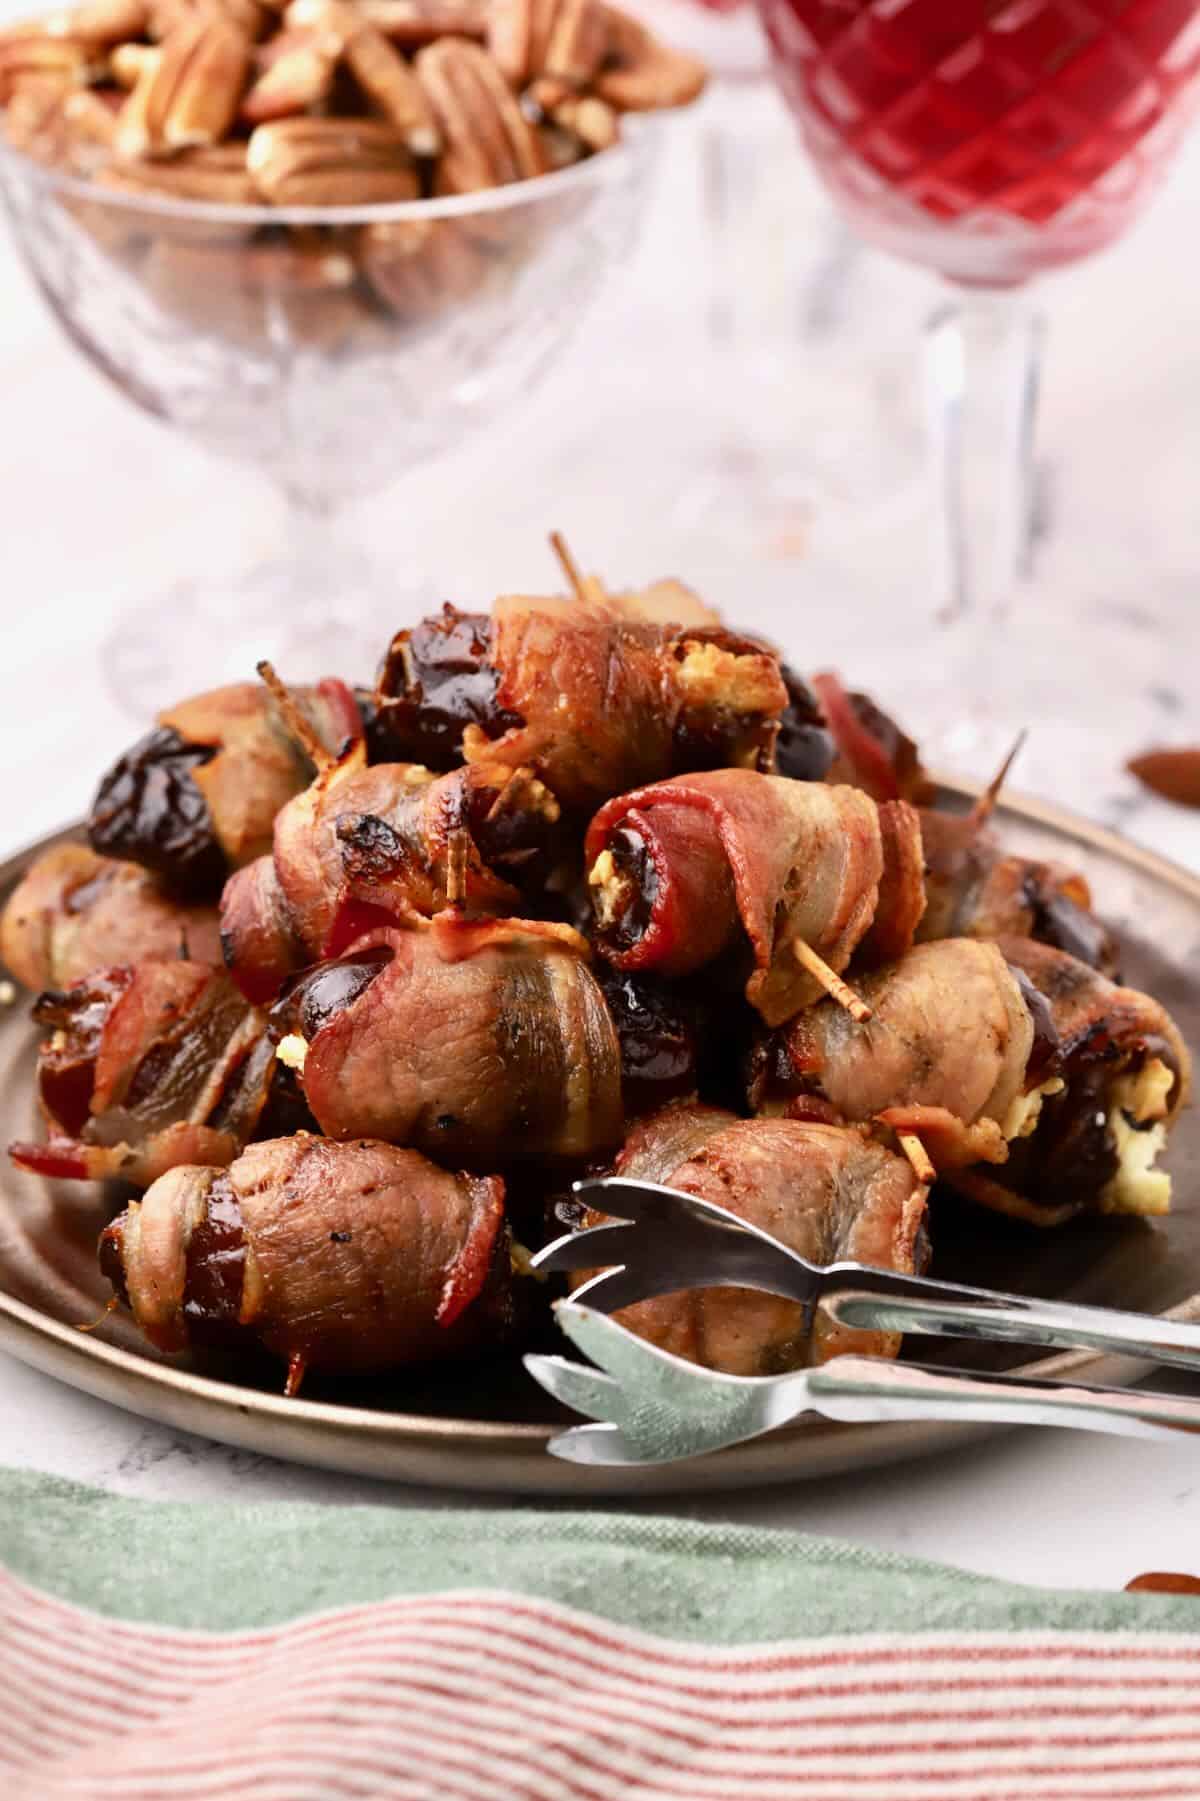 Bacon-wrapped stuffed dates on a bronze plate.